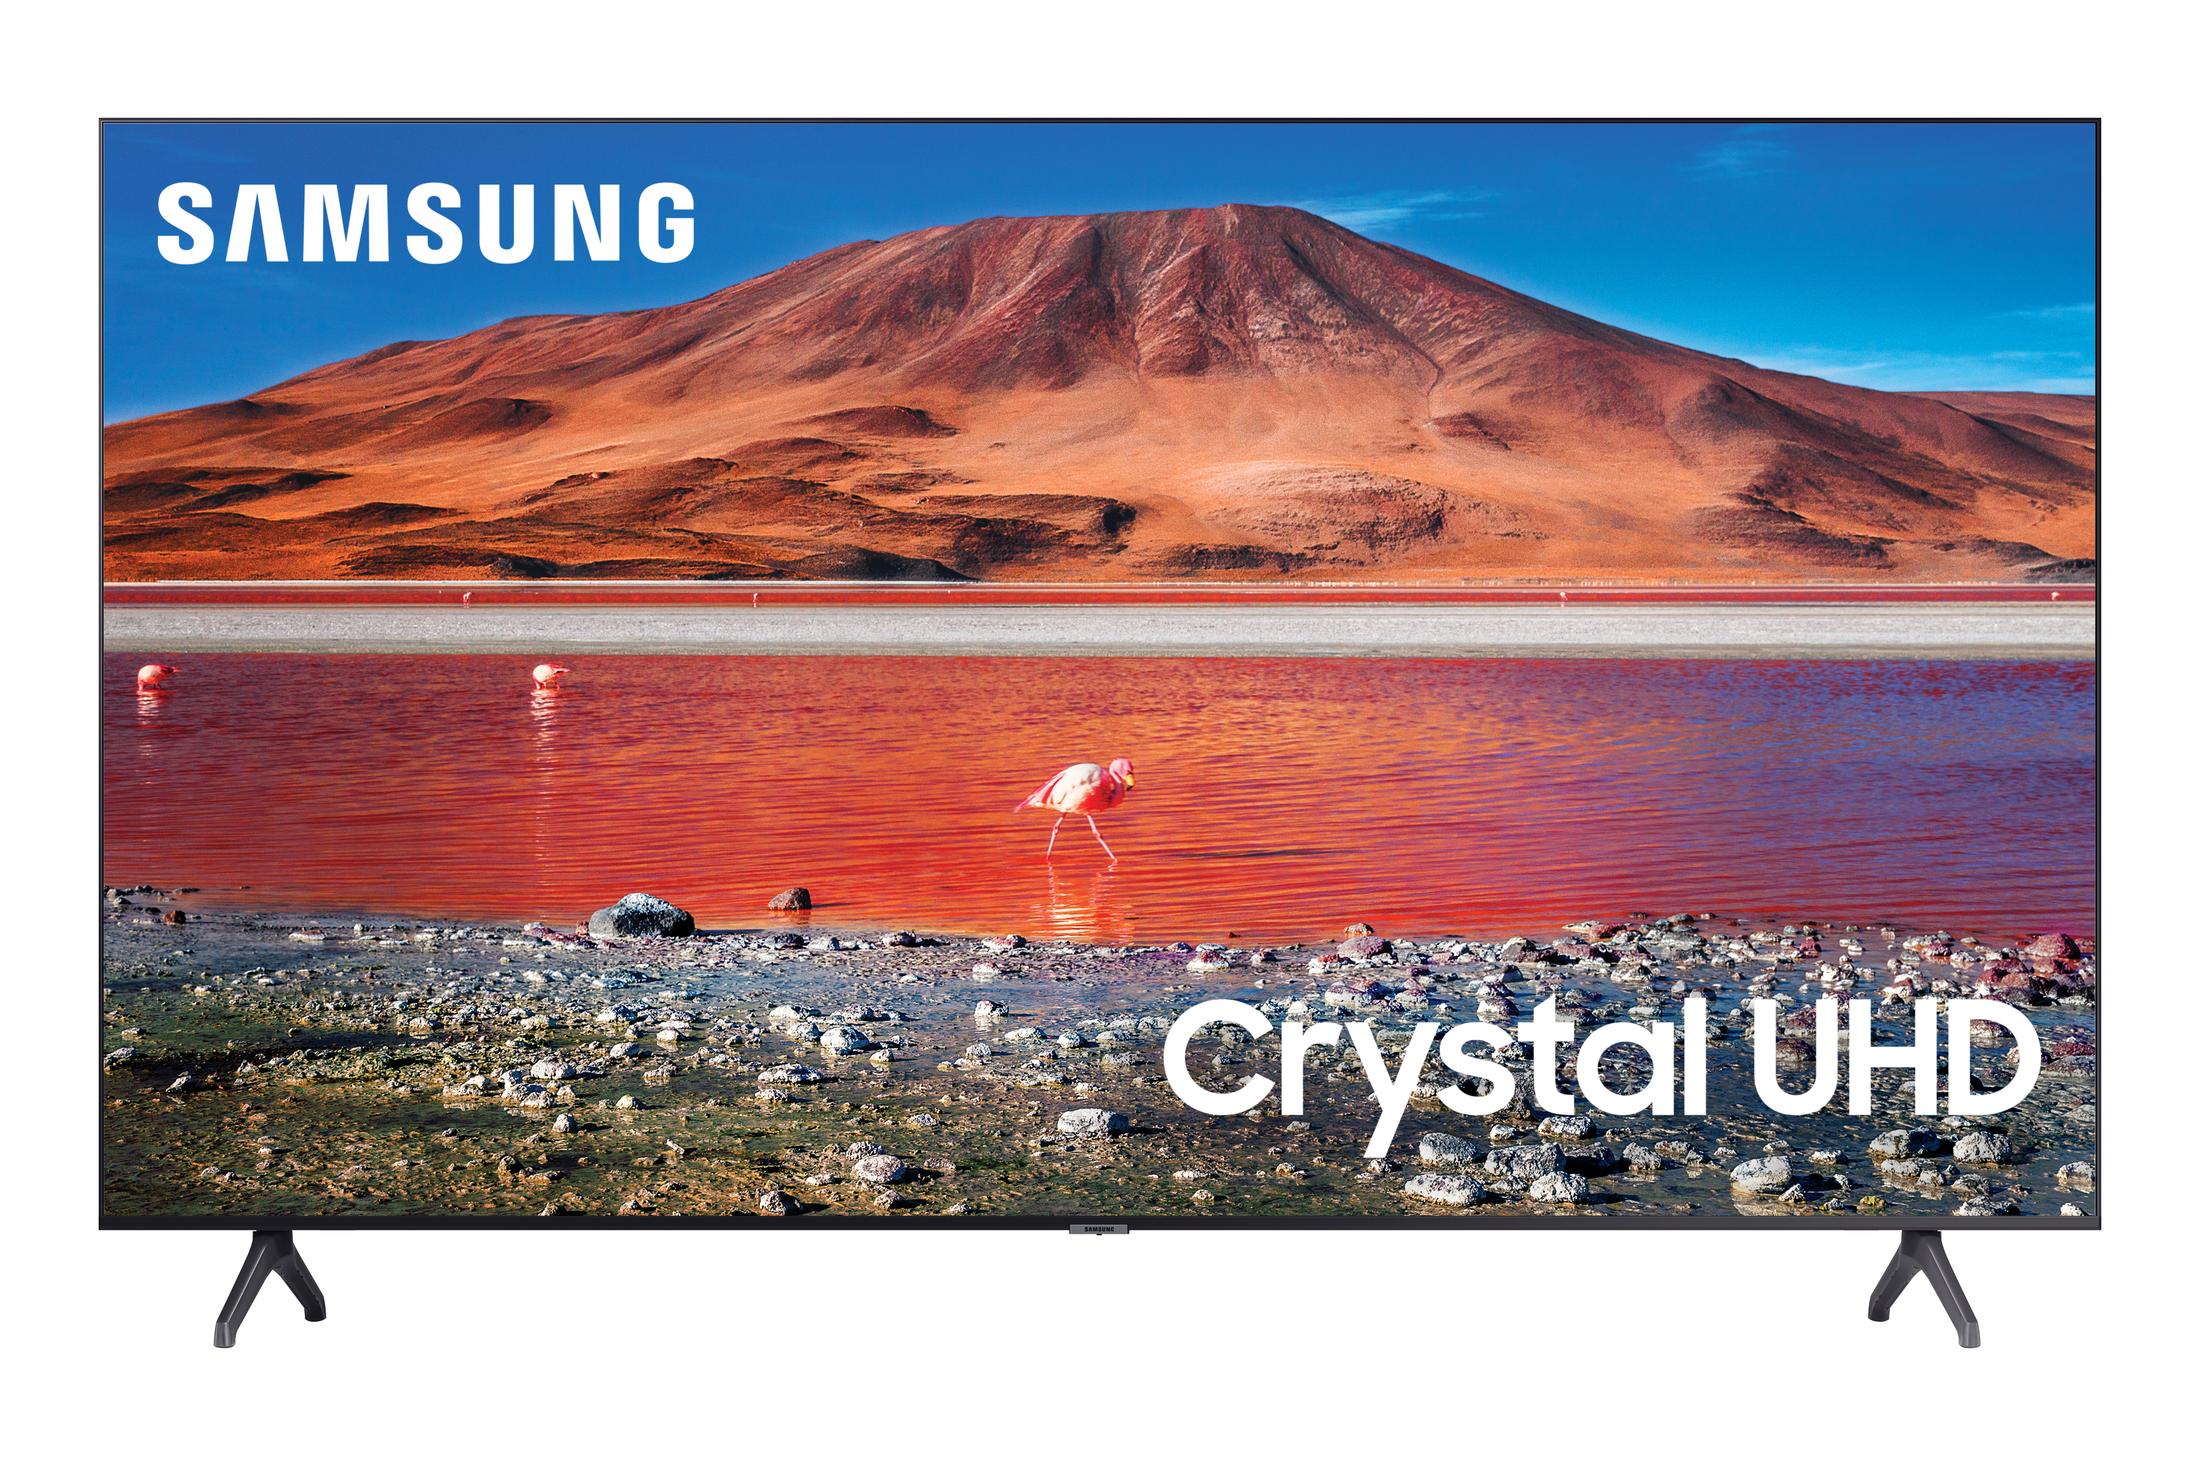 SAMSUNG 43" Class 4K Crystal UHD (2160P) LED Smart TV with HDR UN43TU7000 - image 1 of 9